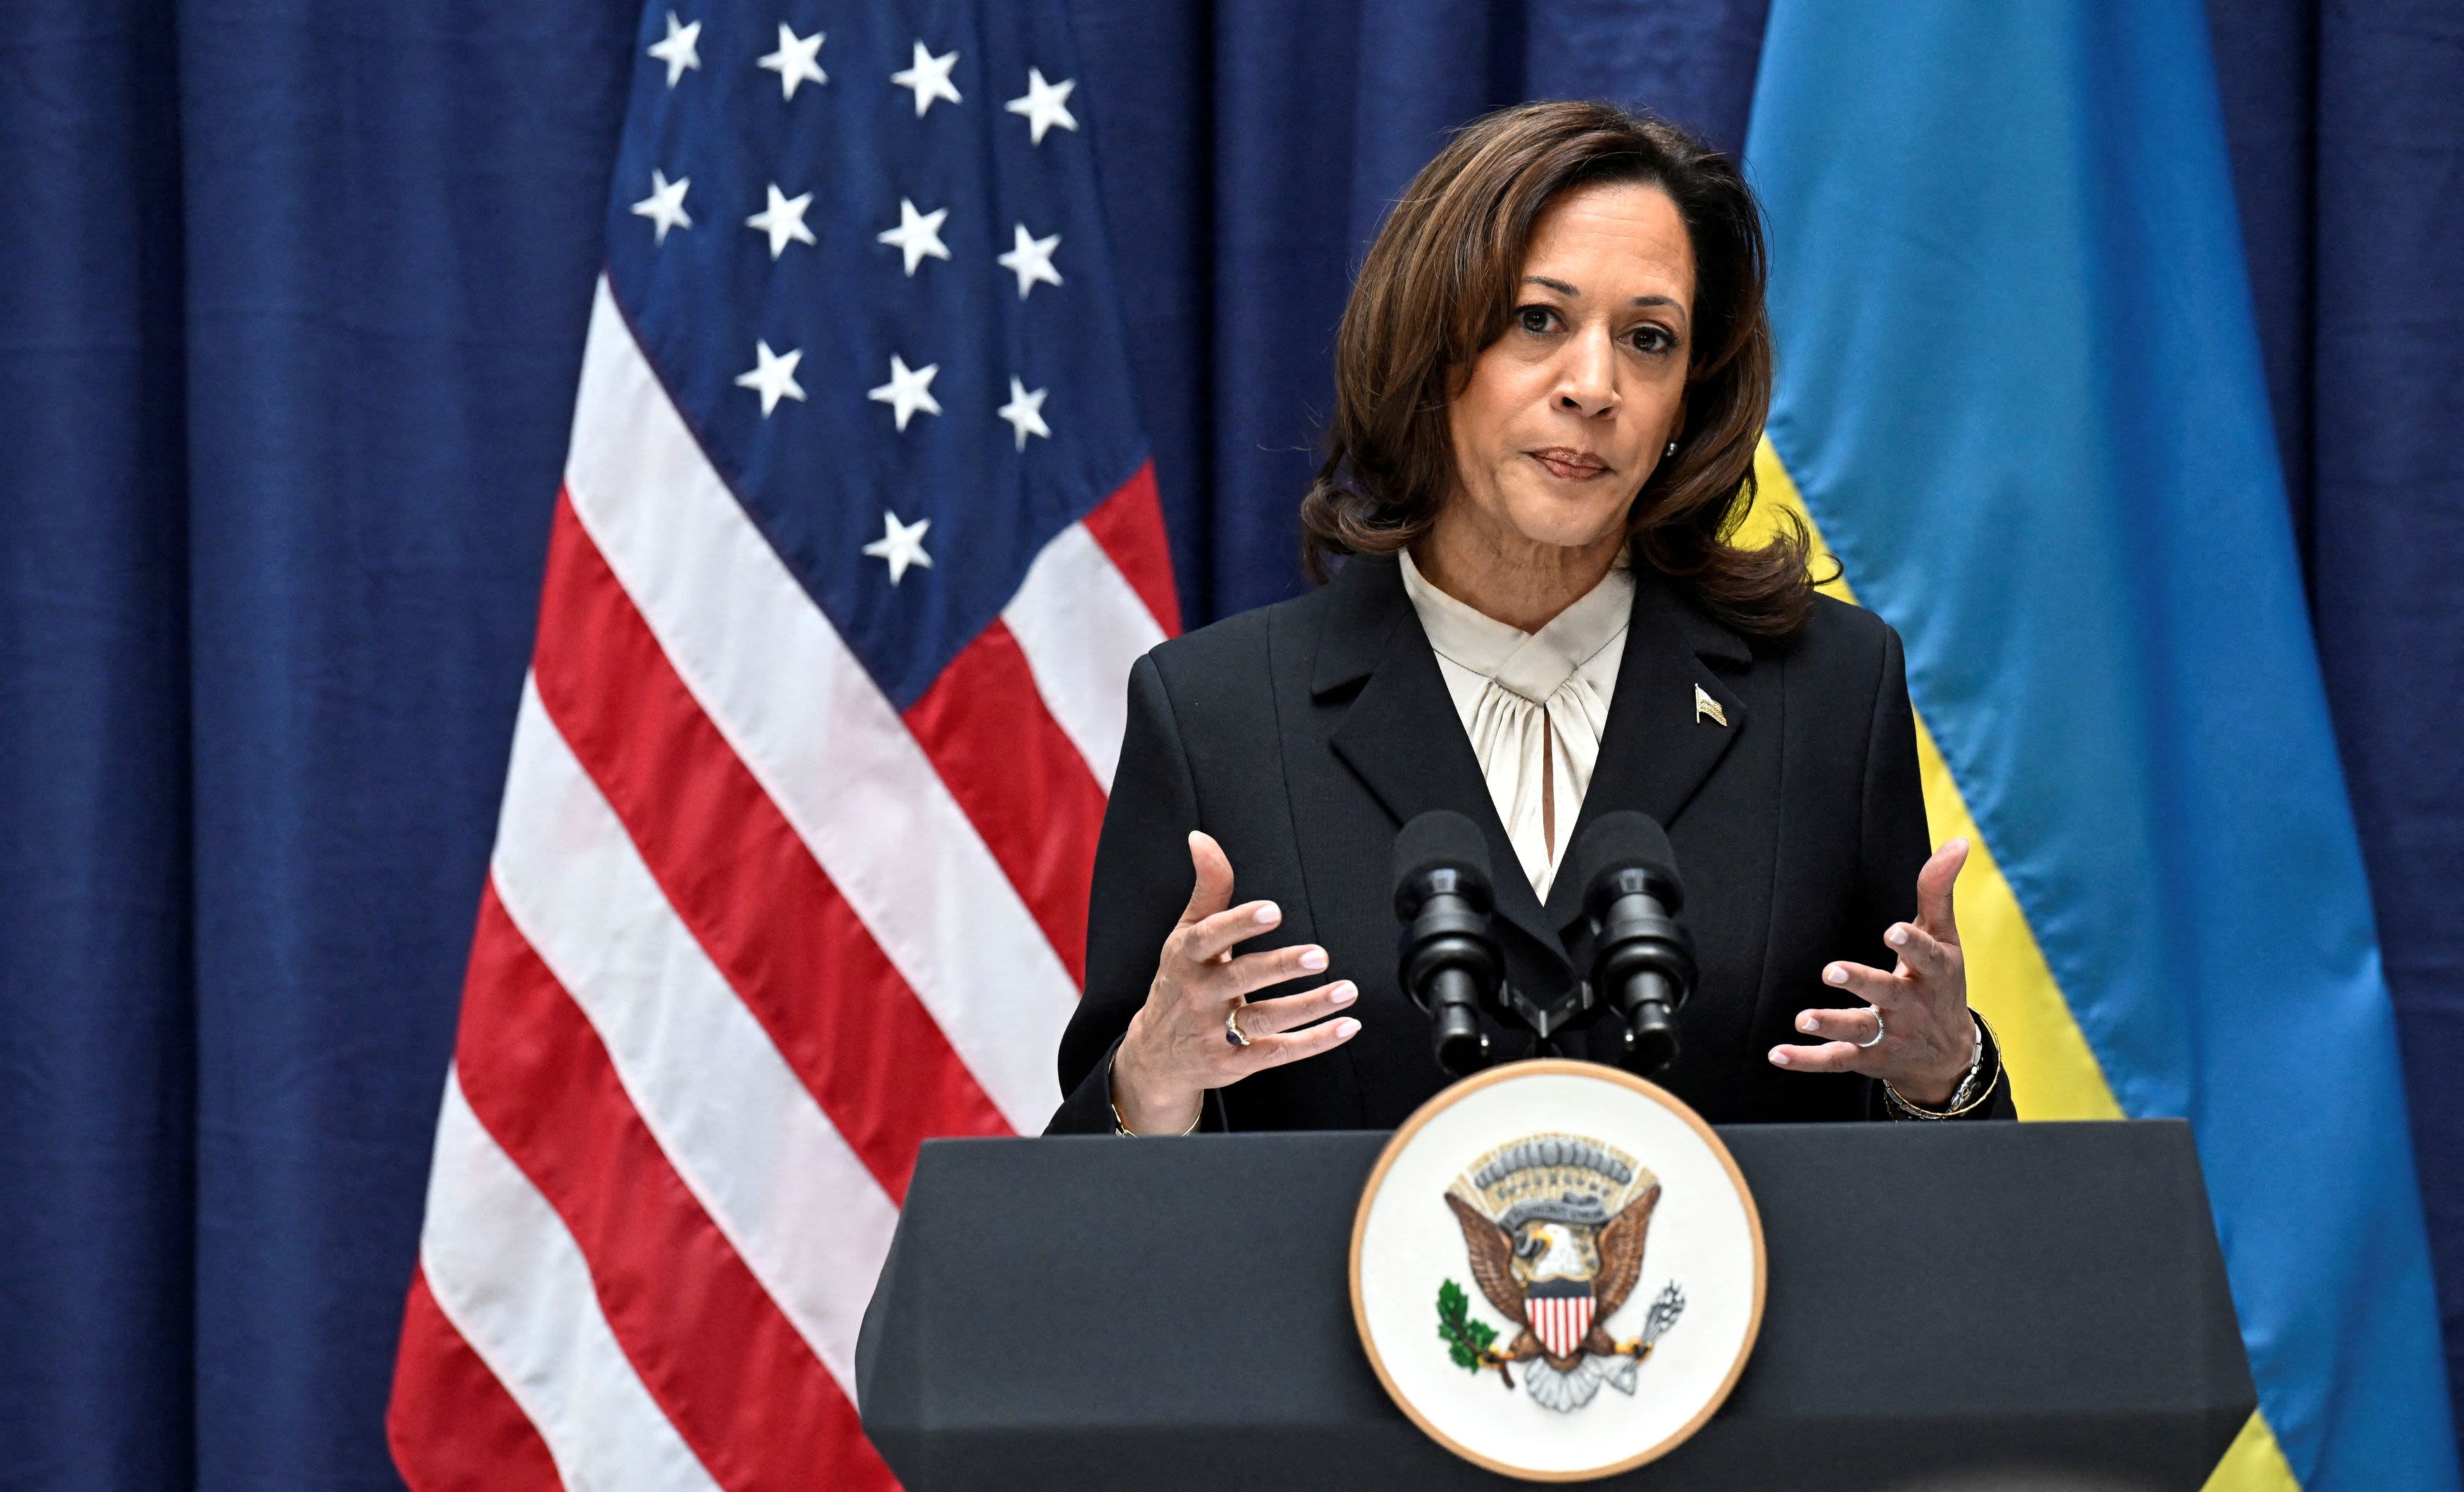 Democratic foreign policy heavyweights endorse Harris in open letter